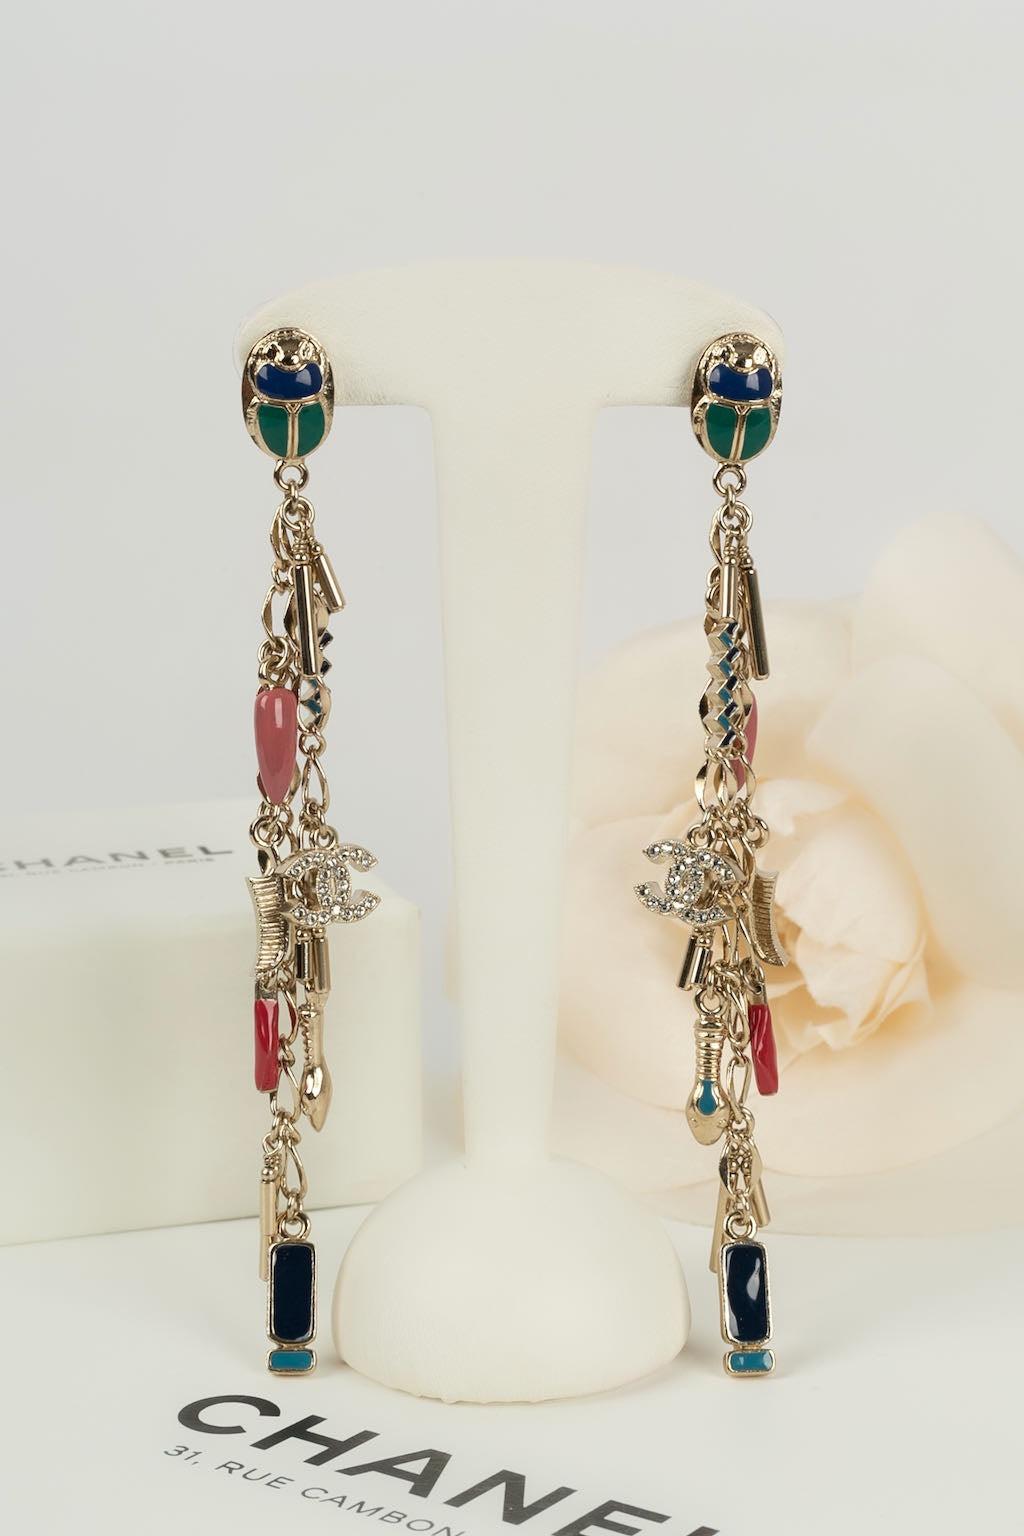 Chanel Fashion Show Champagne Metal Earrings, 2019 For Sale 2